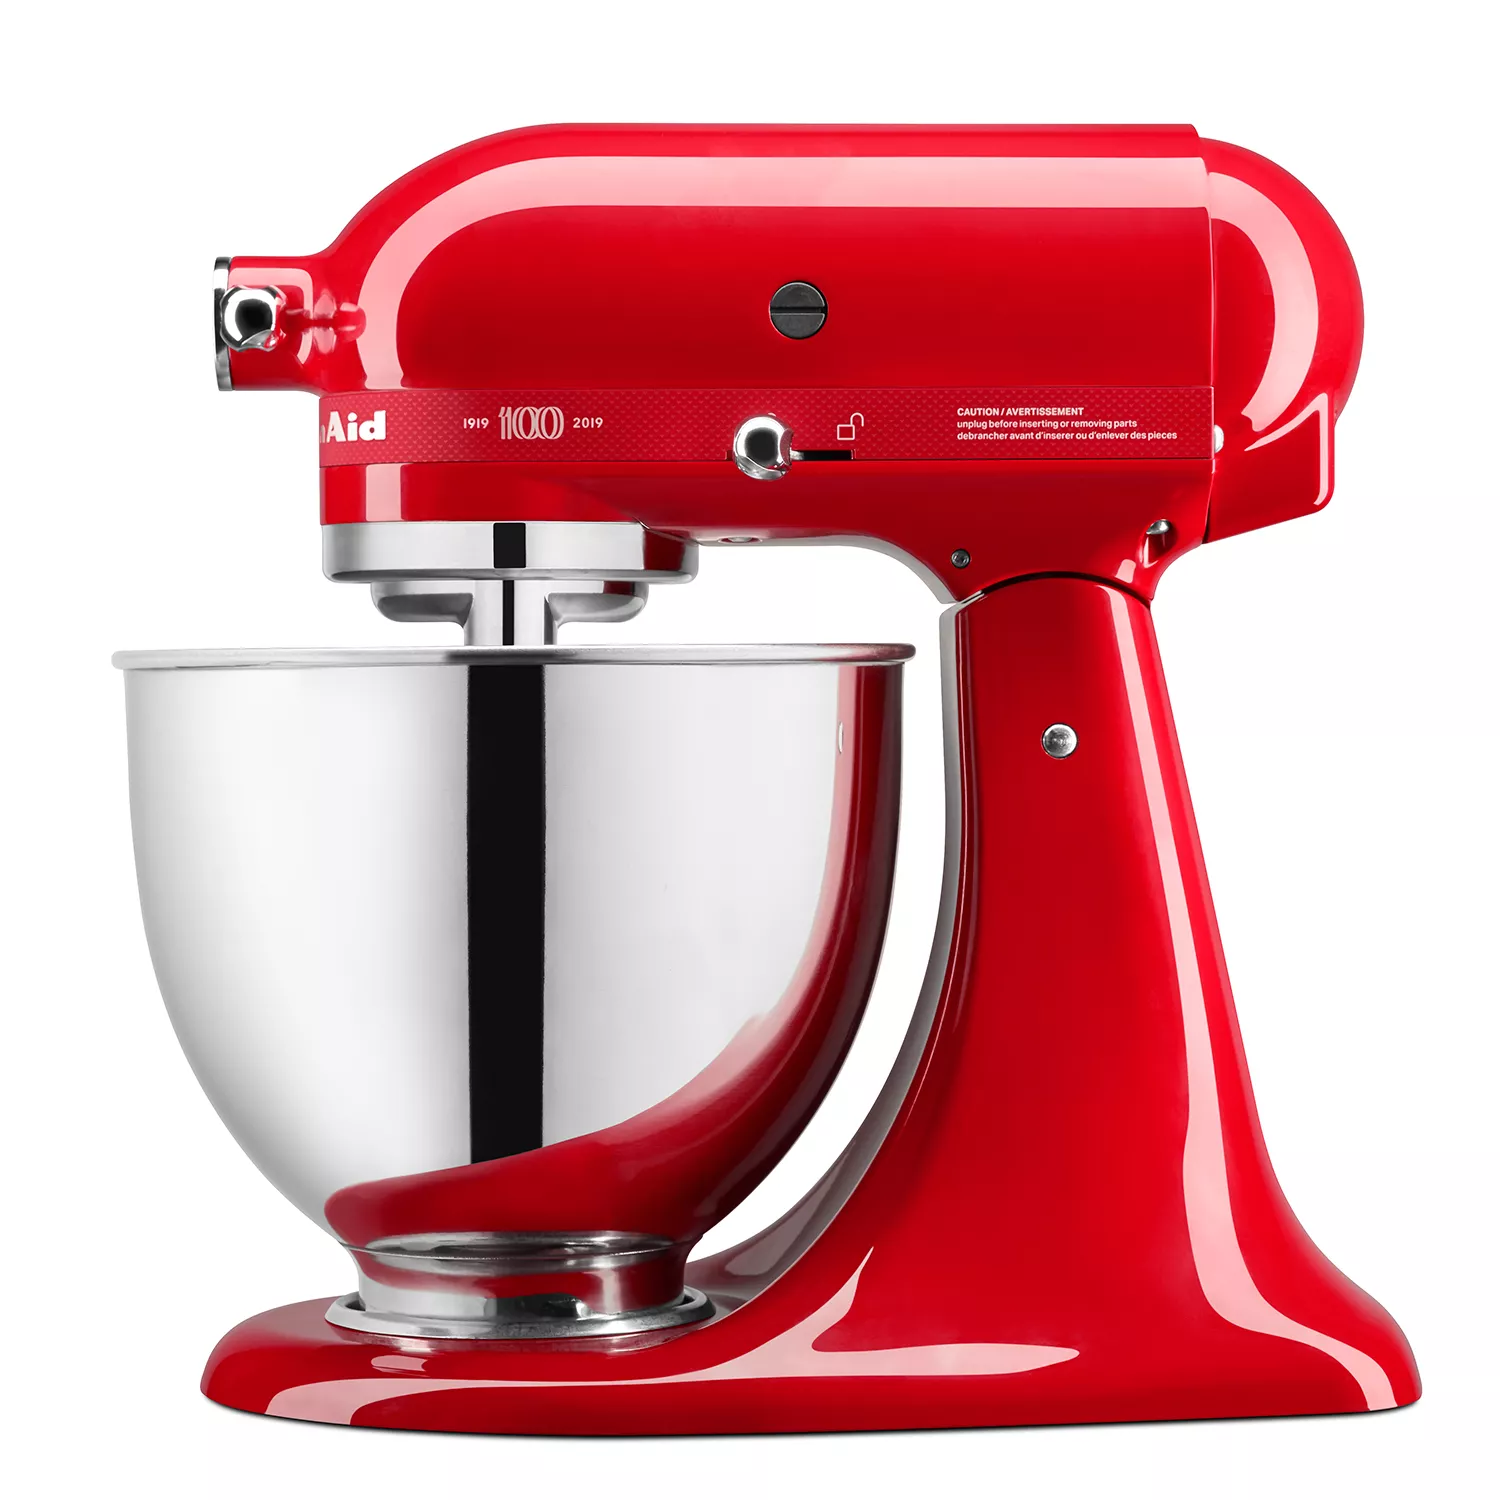 My KitchenAid Stand Mixer Factory Repair Experience - The Floral Apron